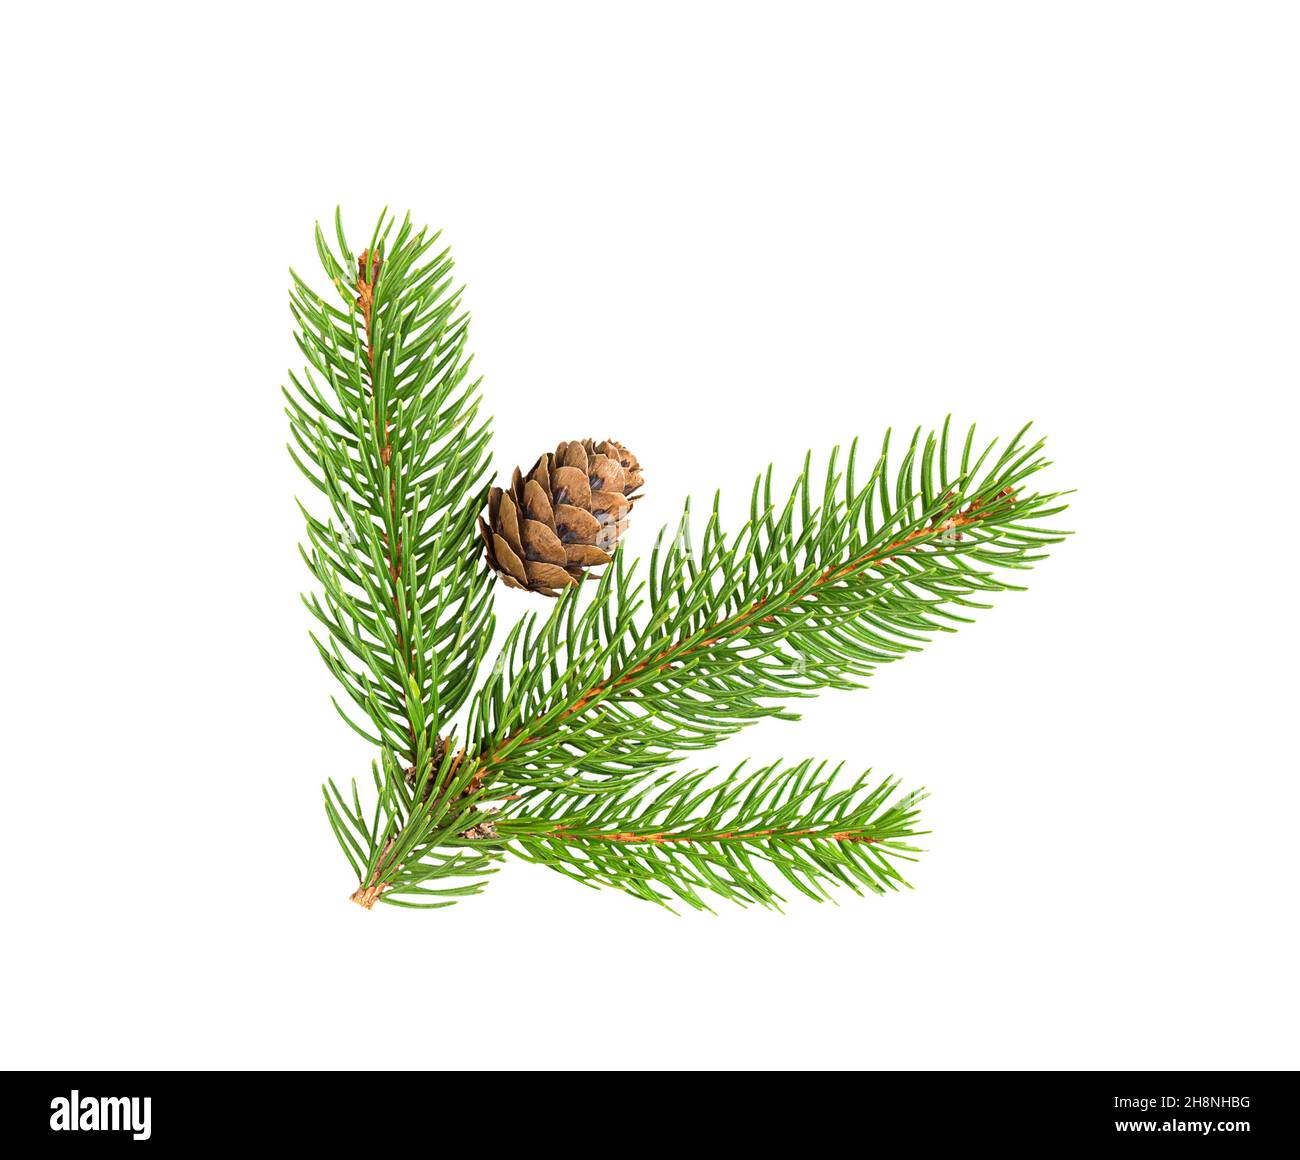 pine branch with a cone isolated on white background Stock Photo